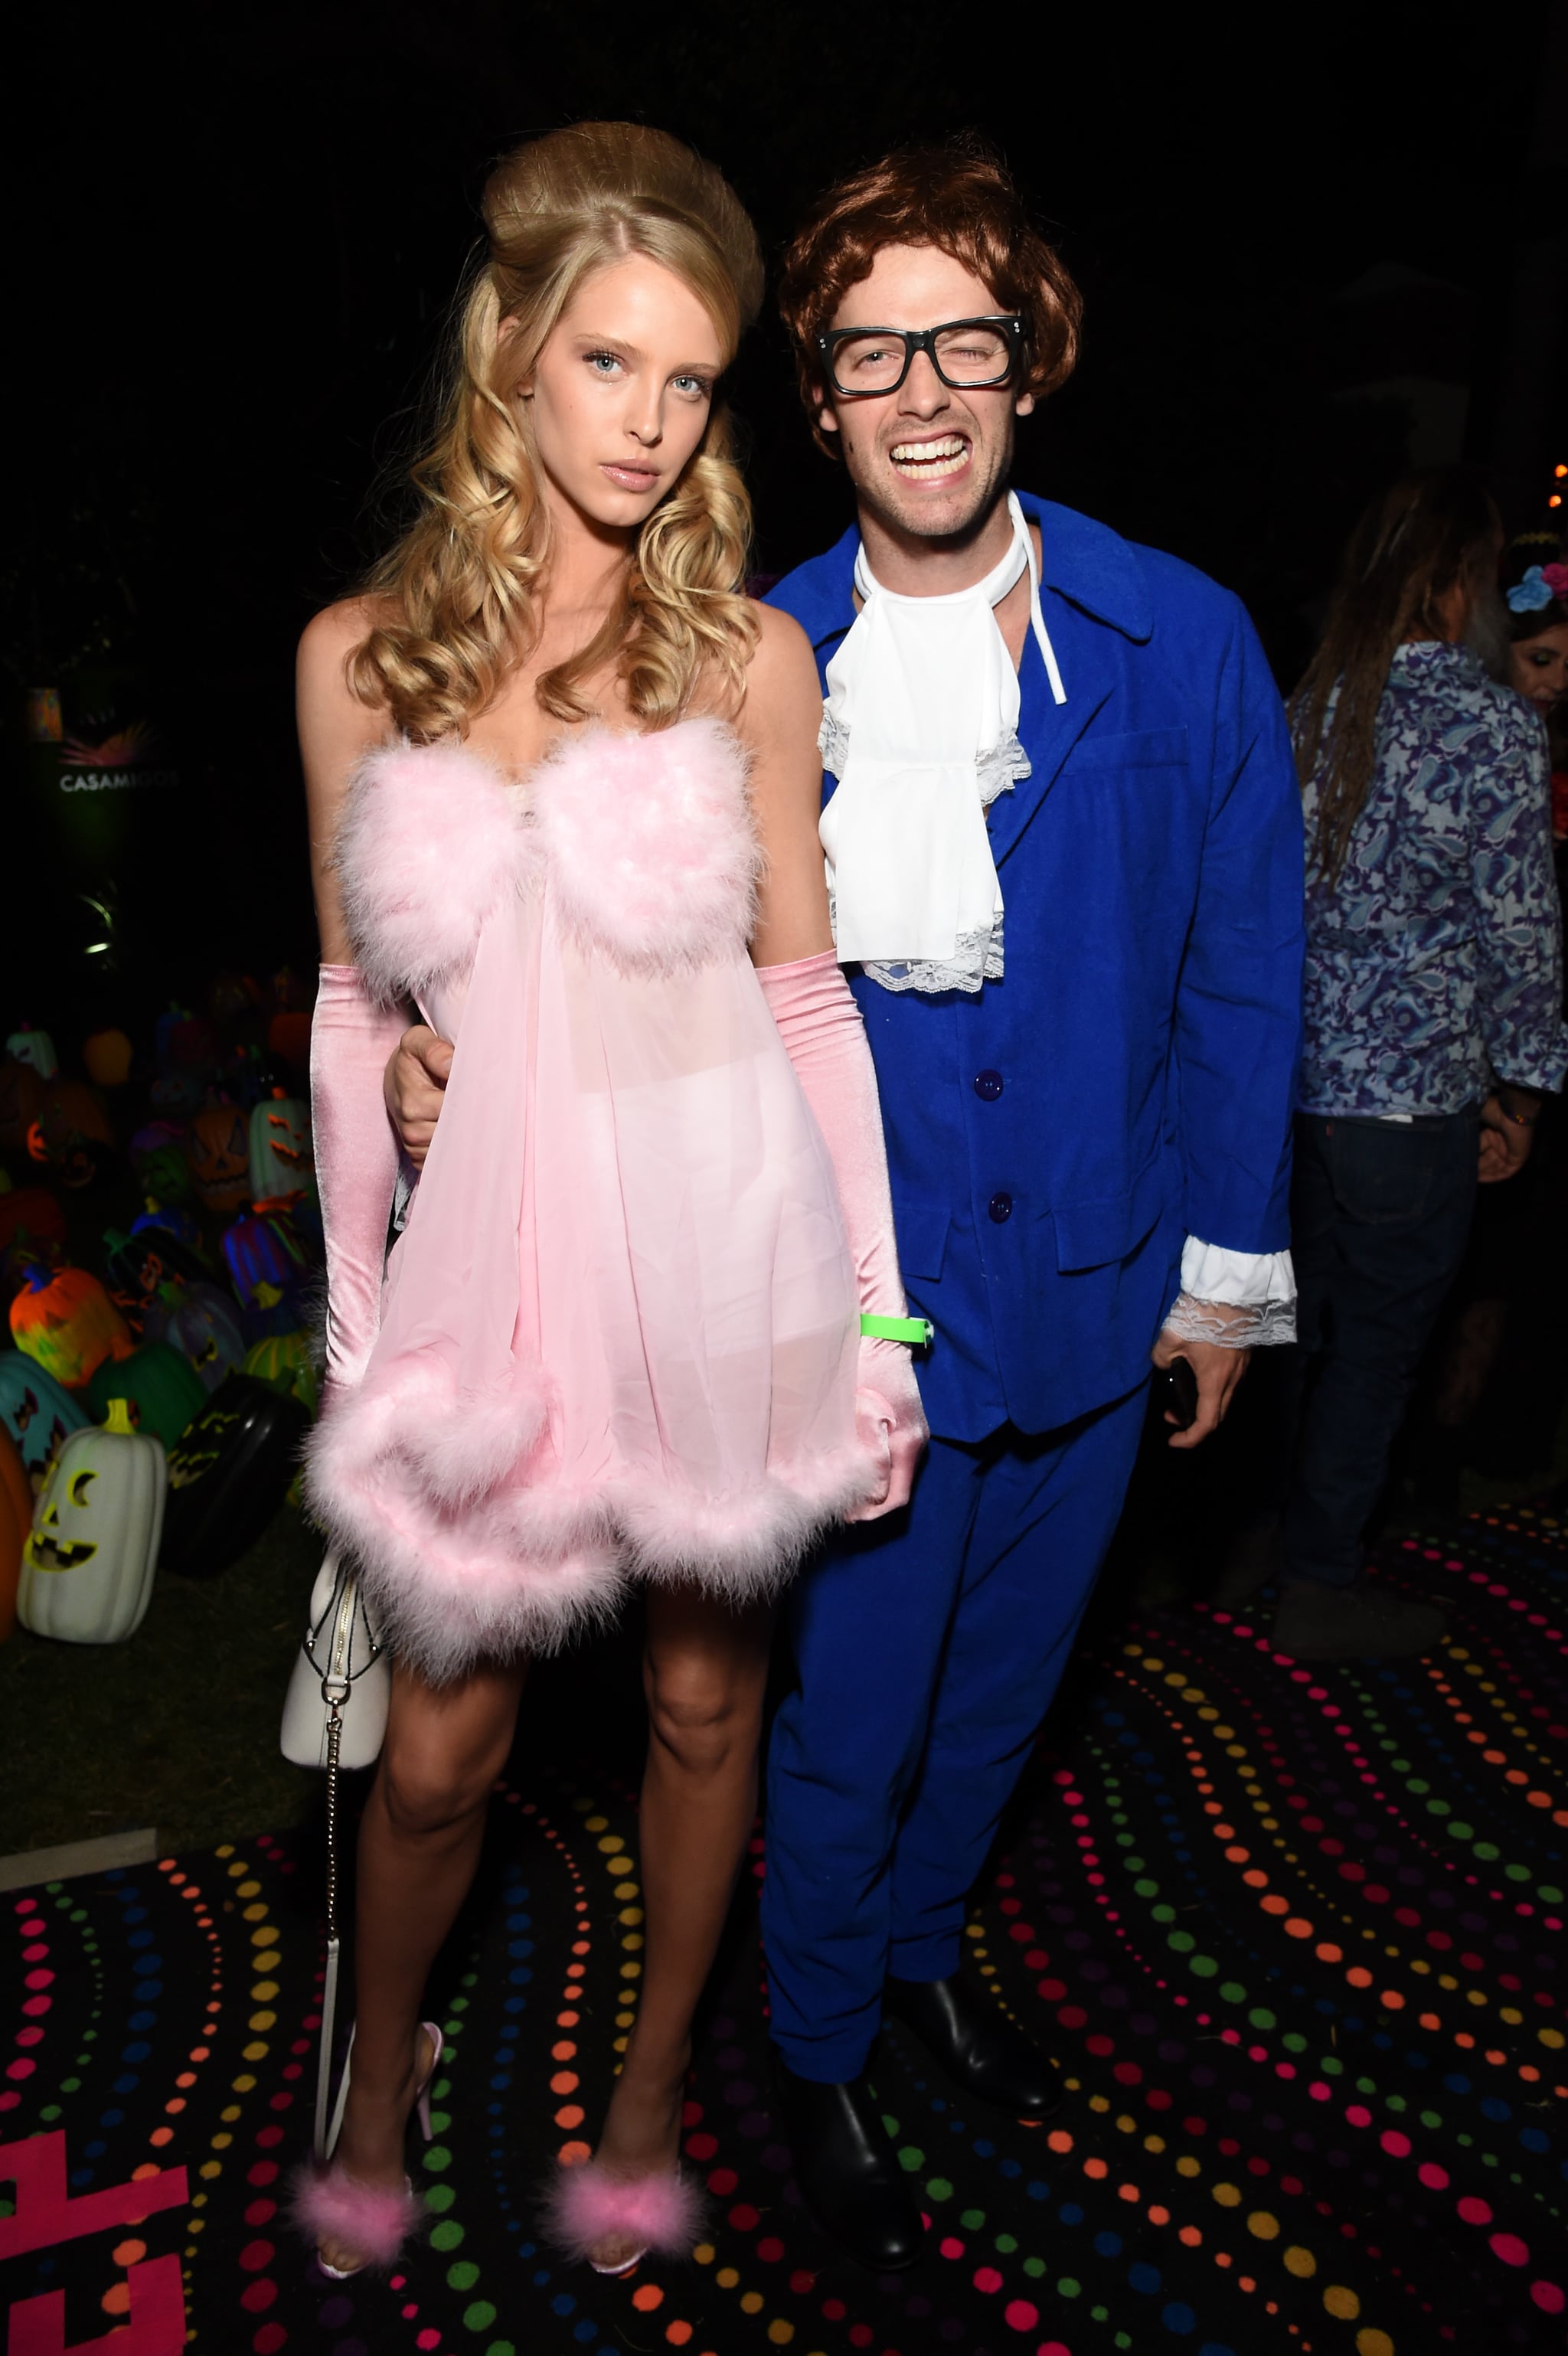 Abby Champion And Patrick Schwarzenegger As A Fembot And Austin Powers You Need To See The Best Halloween Costumes Of 2019 Popsugar Smart Living Uk Photo 21